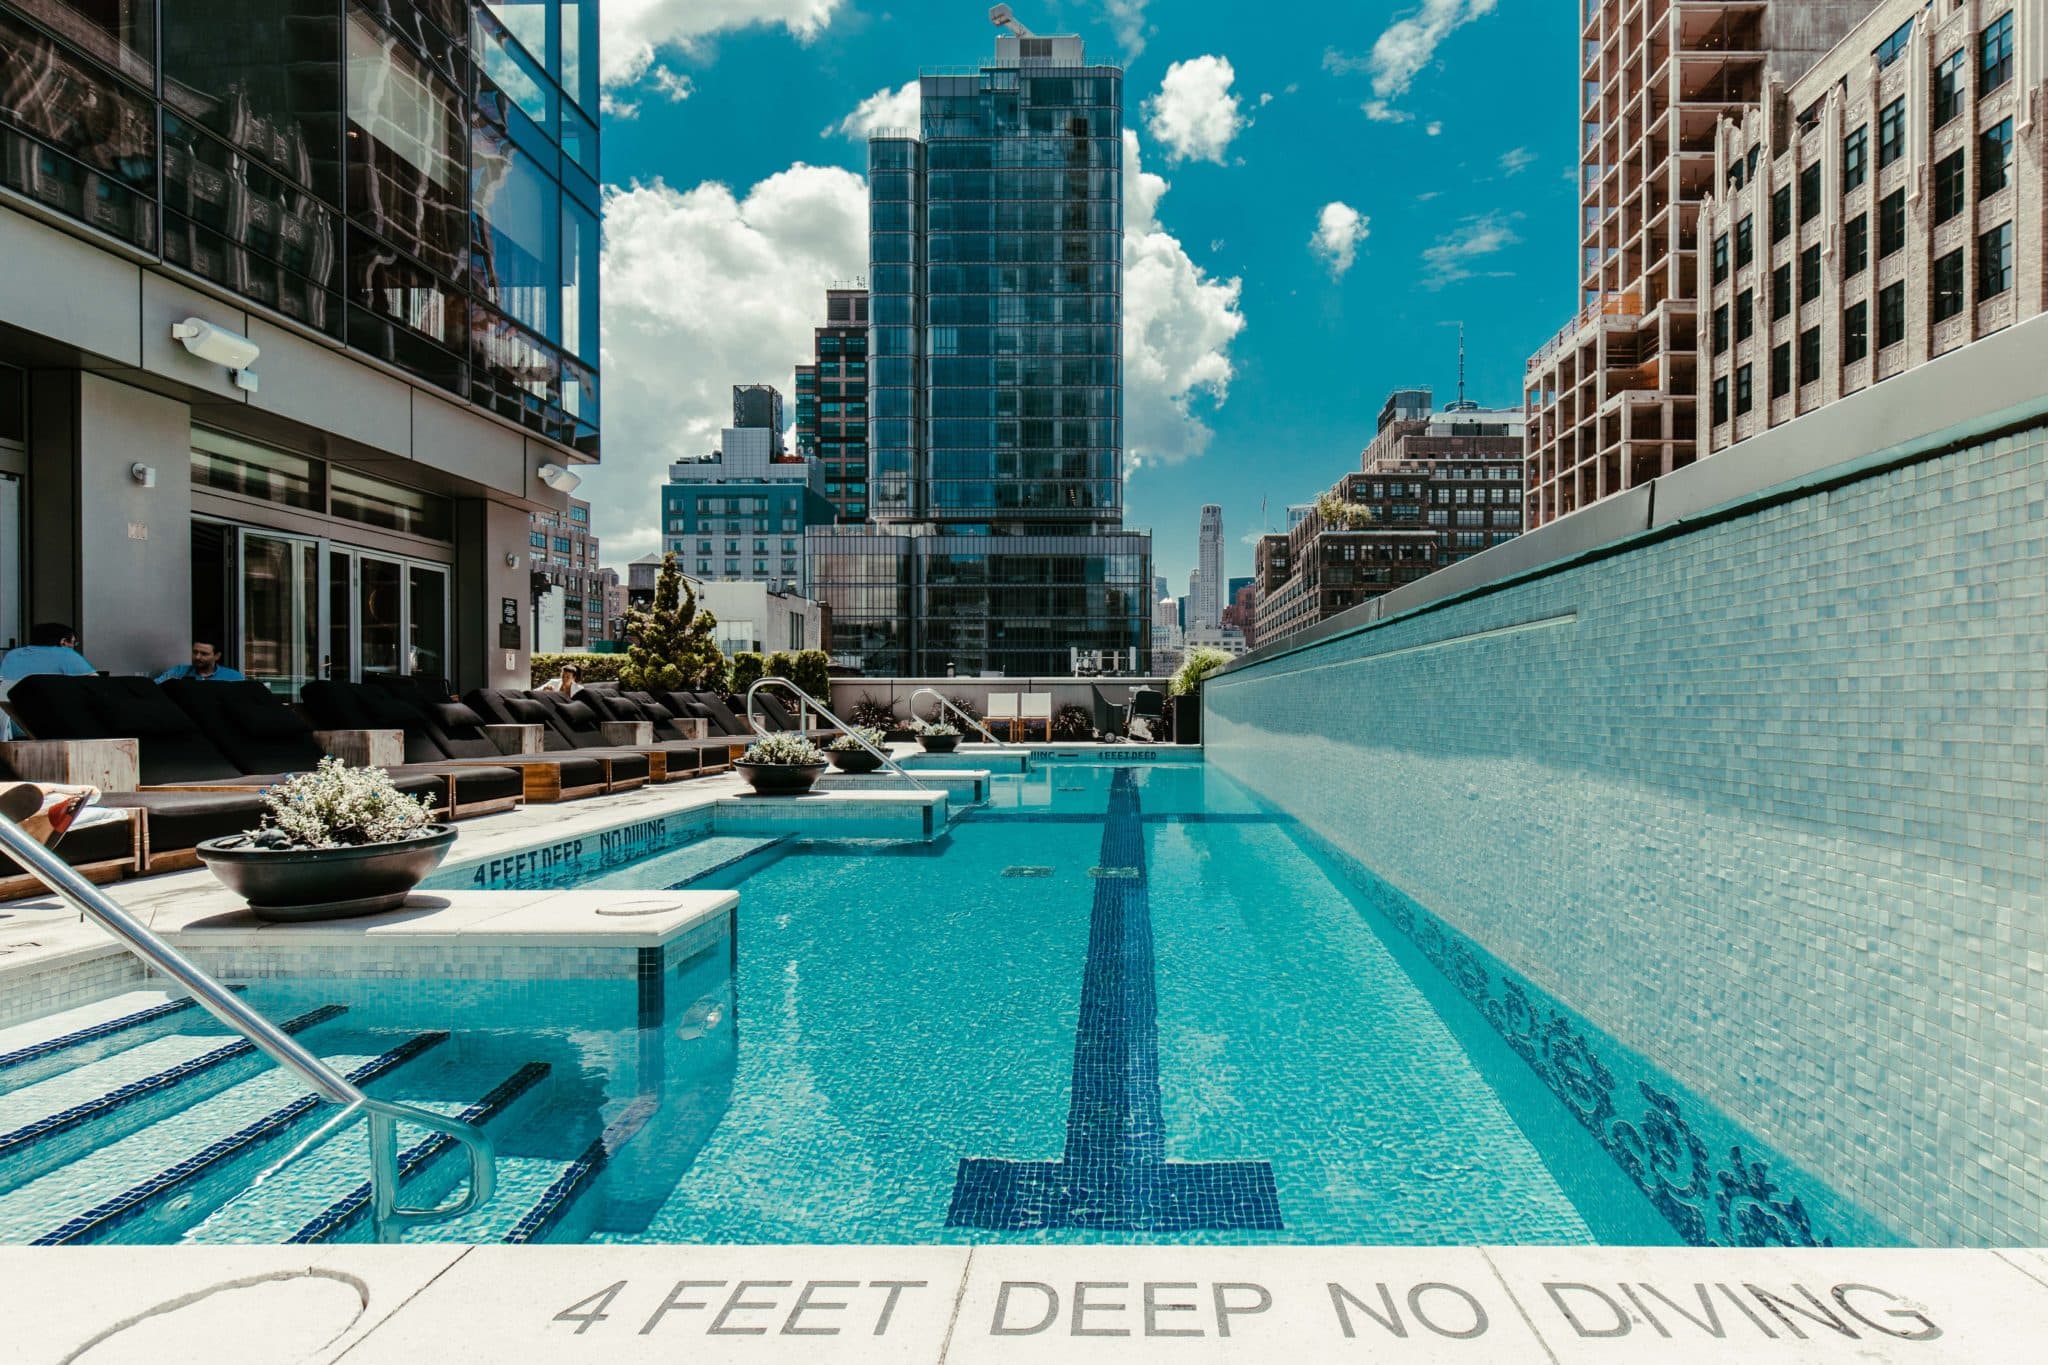 Shutterstock Rooftop Pool Scaled 